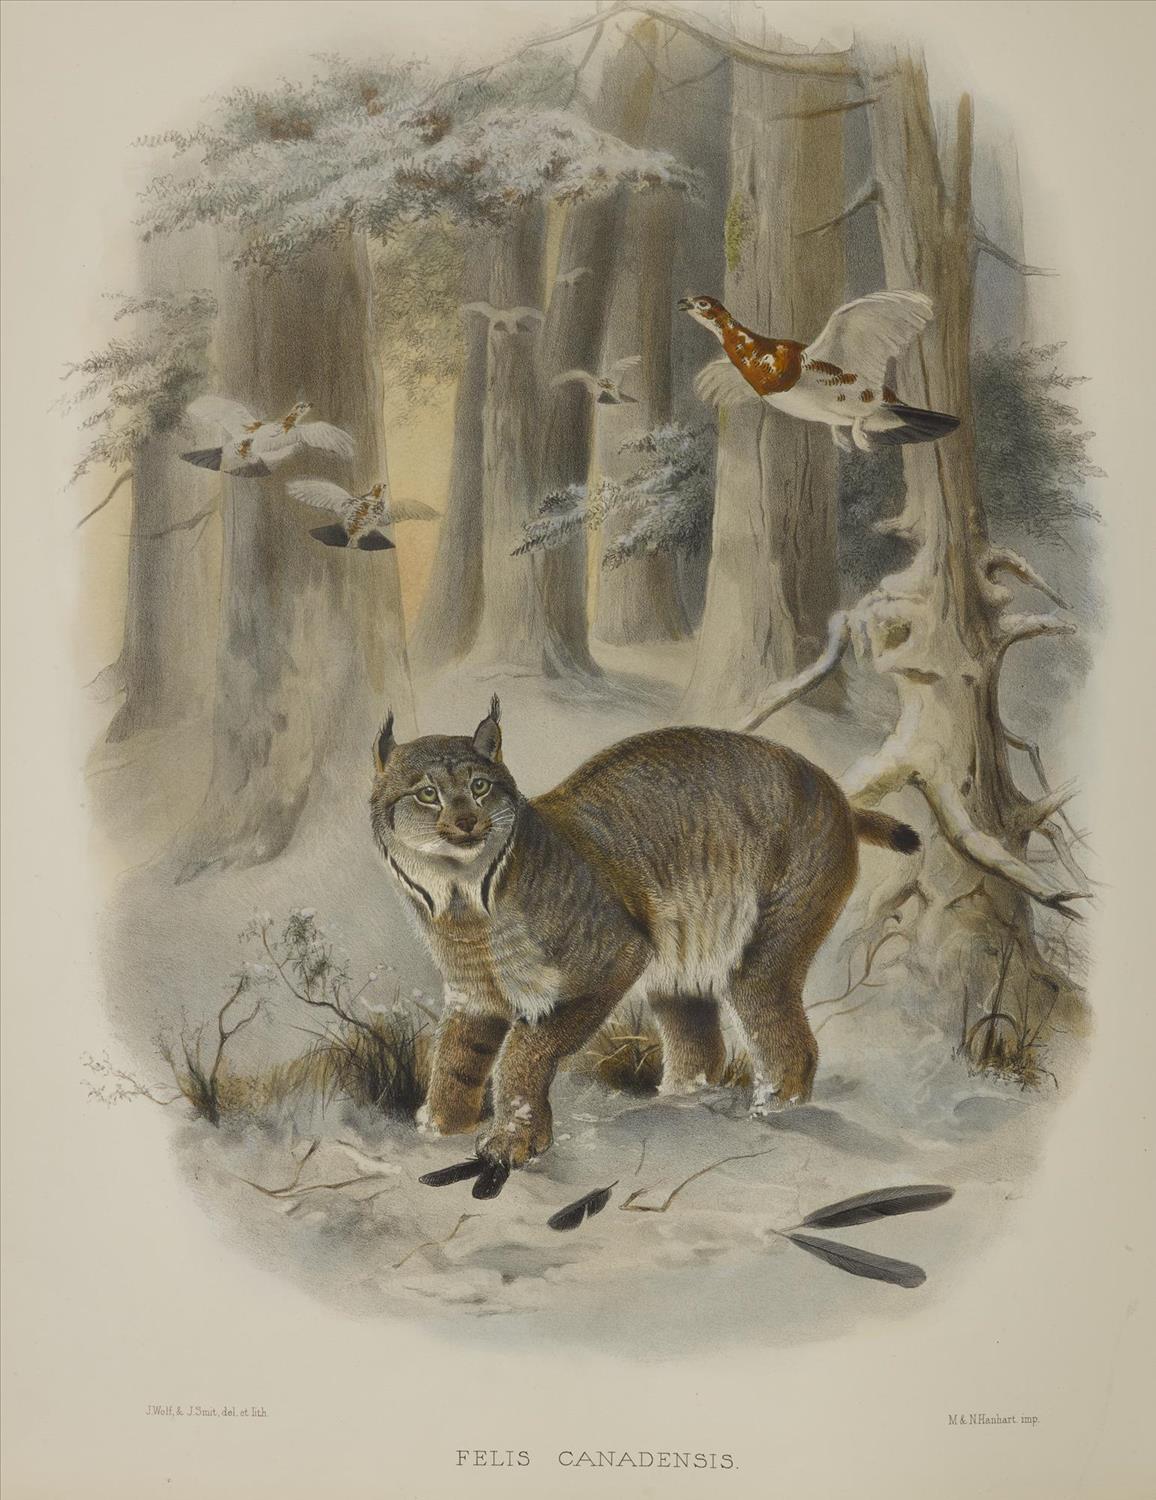 Felis Canadensis from A monograph of the Felidae or family of the cats, by Daniel Giraud Elliot, 1883.